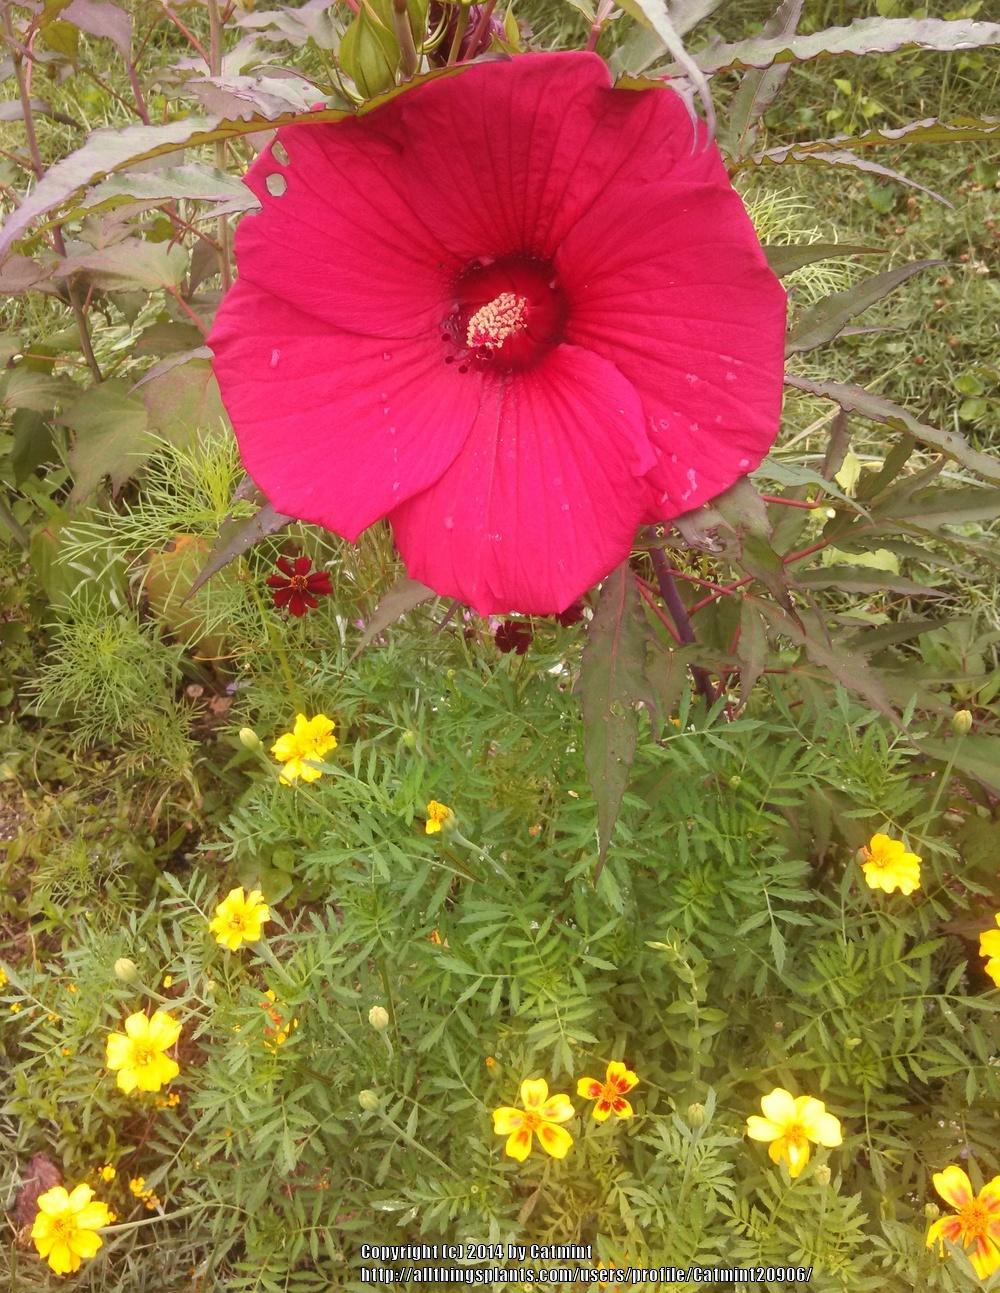 Photo of Hybrid Hardy Hibiscus (Hibiscus 'Fireball') uploaded by Catmint20906